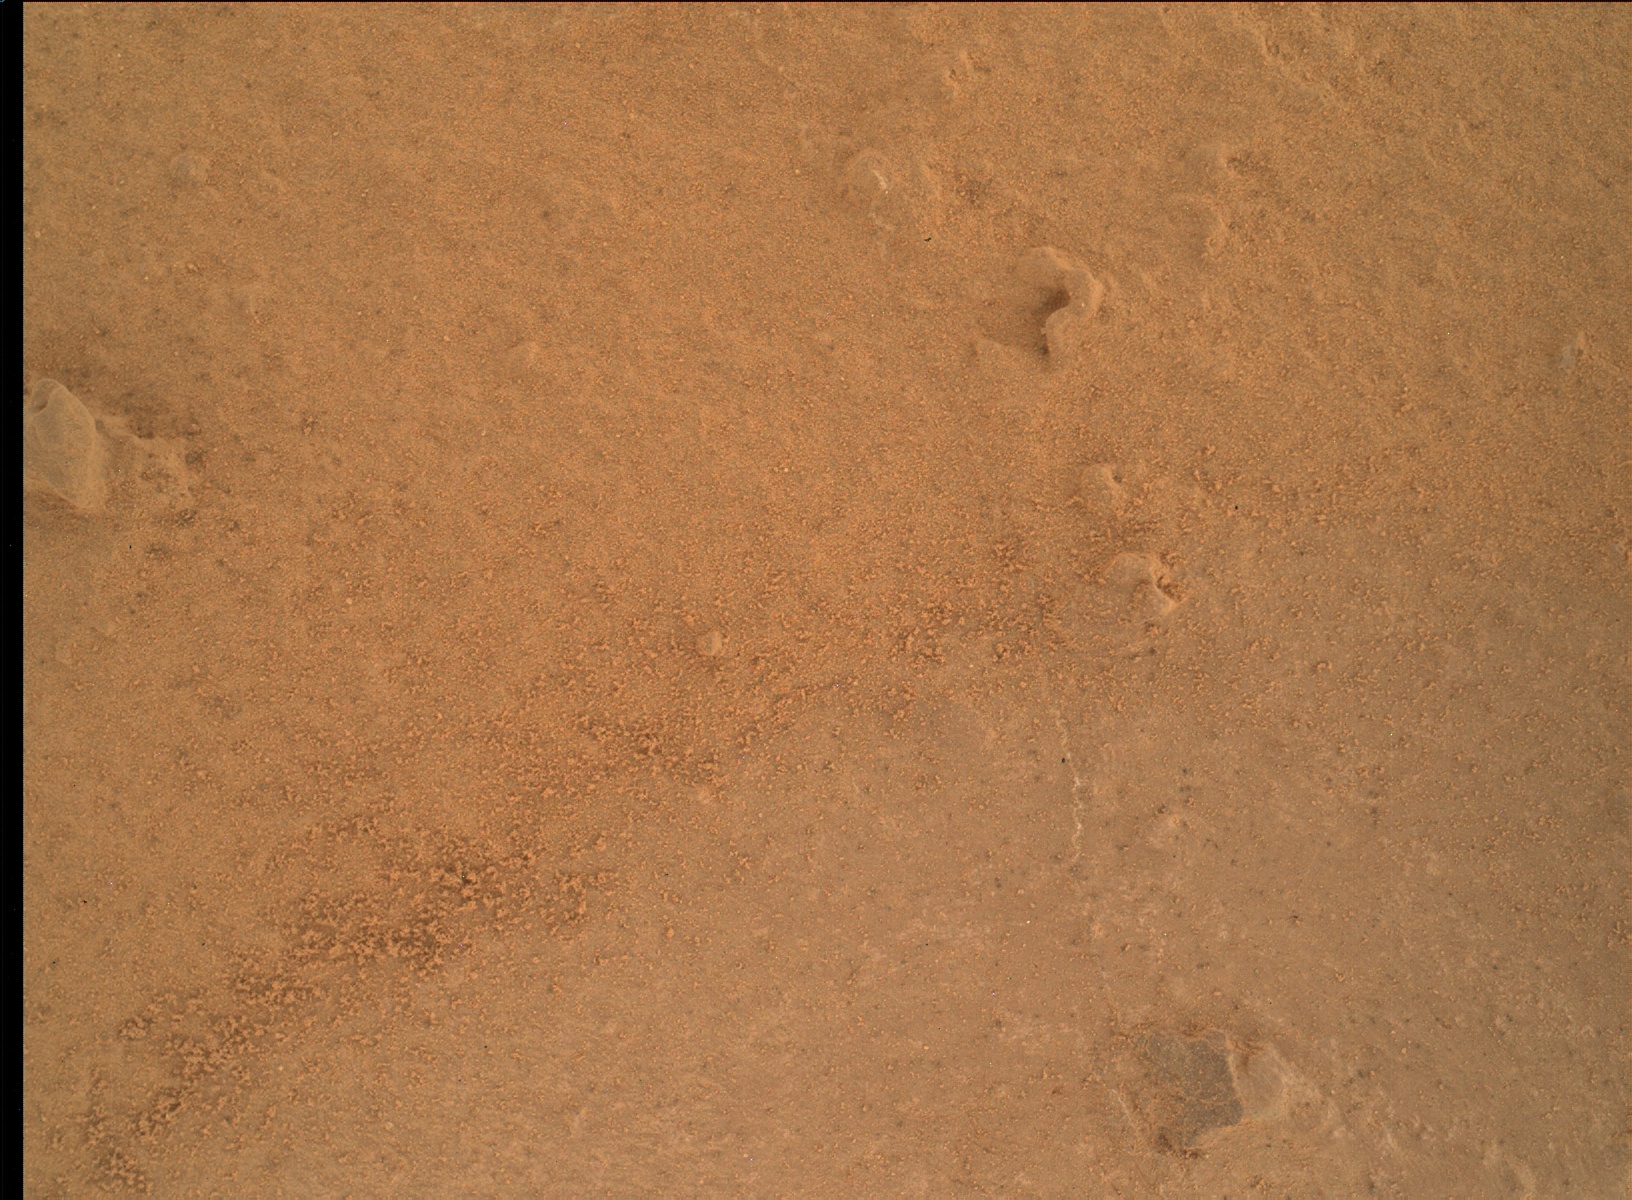 Nasa's Mars rover Curiosity acquired this image using its Mars Hand Lens Imager (MAHLI) on Sol 1461